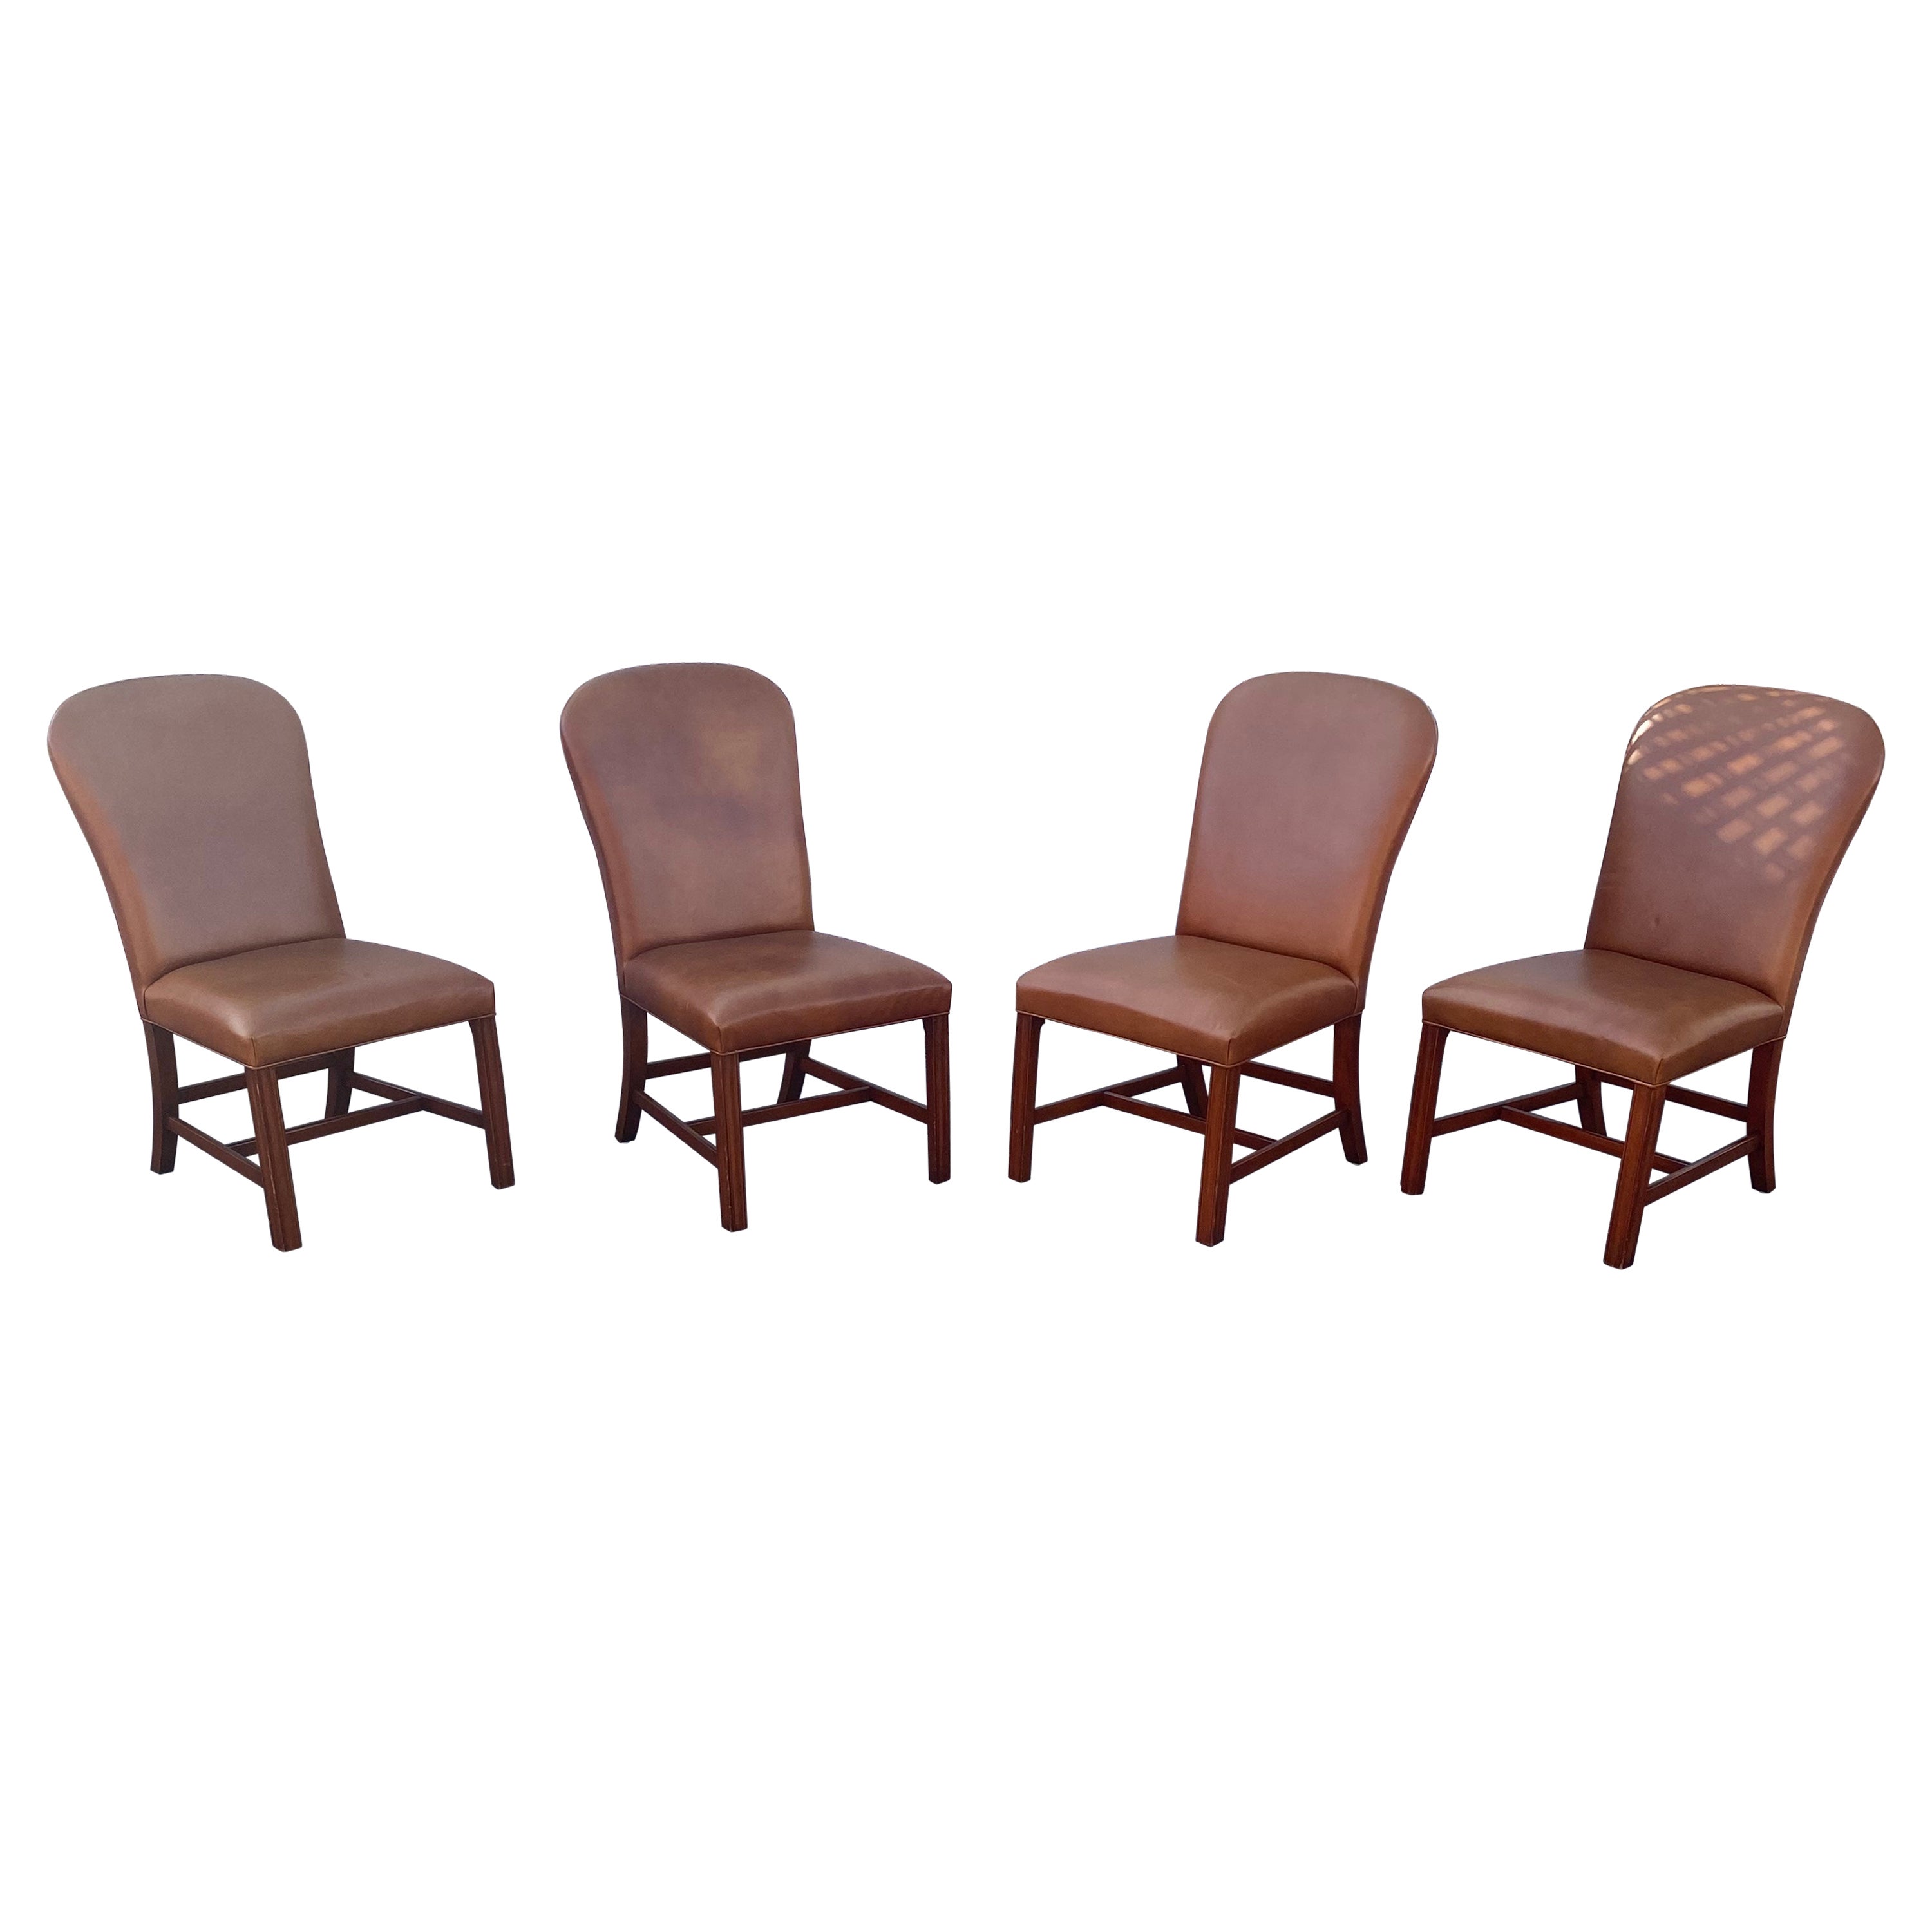 2000s Ralph Lauren Saddle Leather Dining Chairs, Set of 4